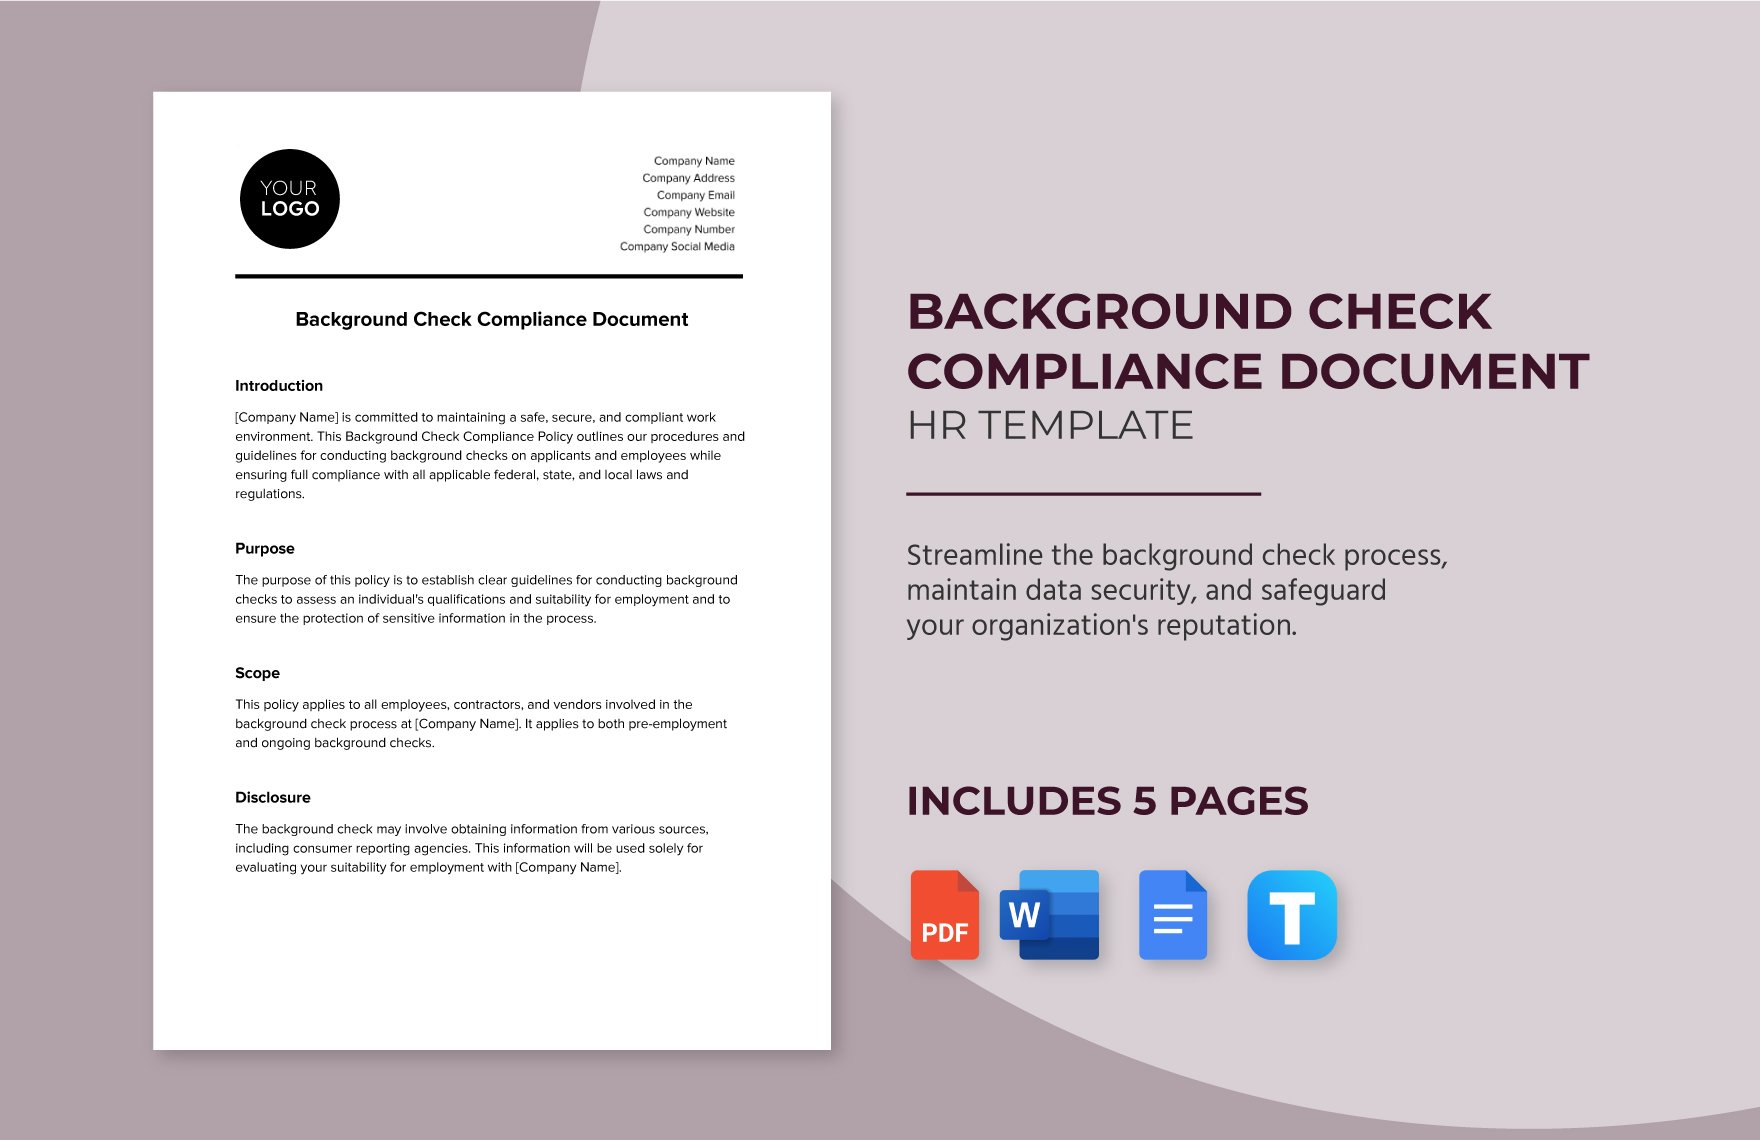 Background Check Compliance HR Template